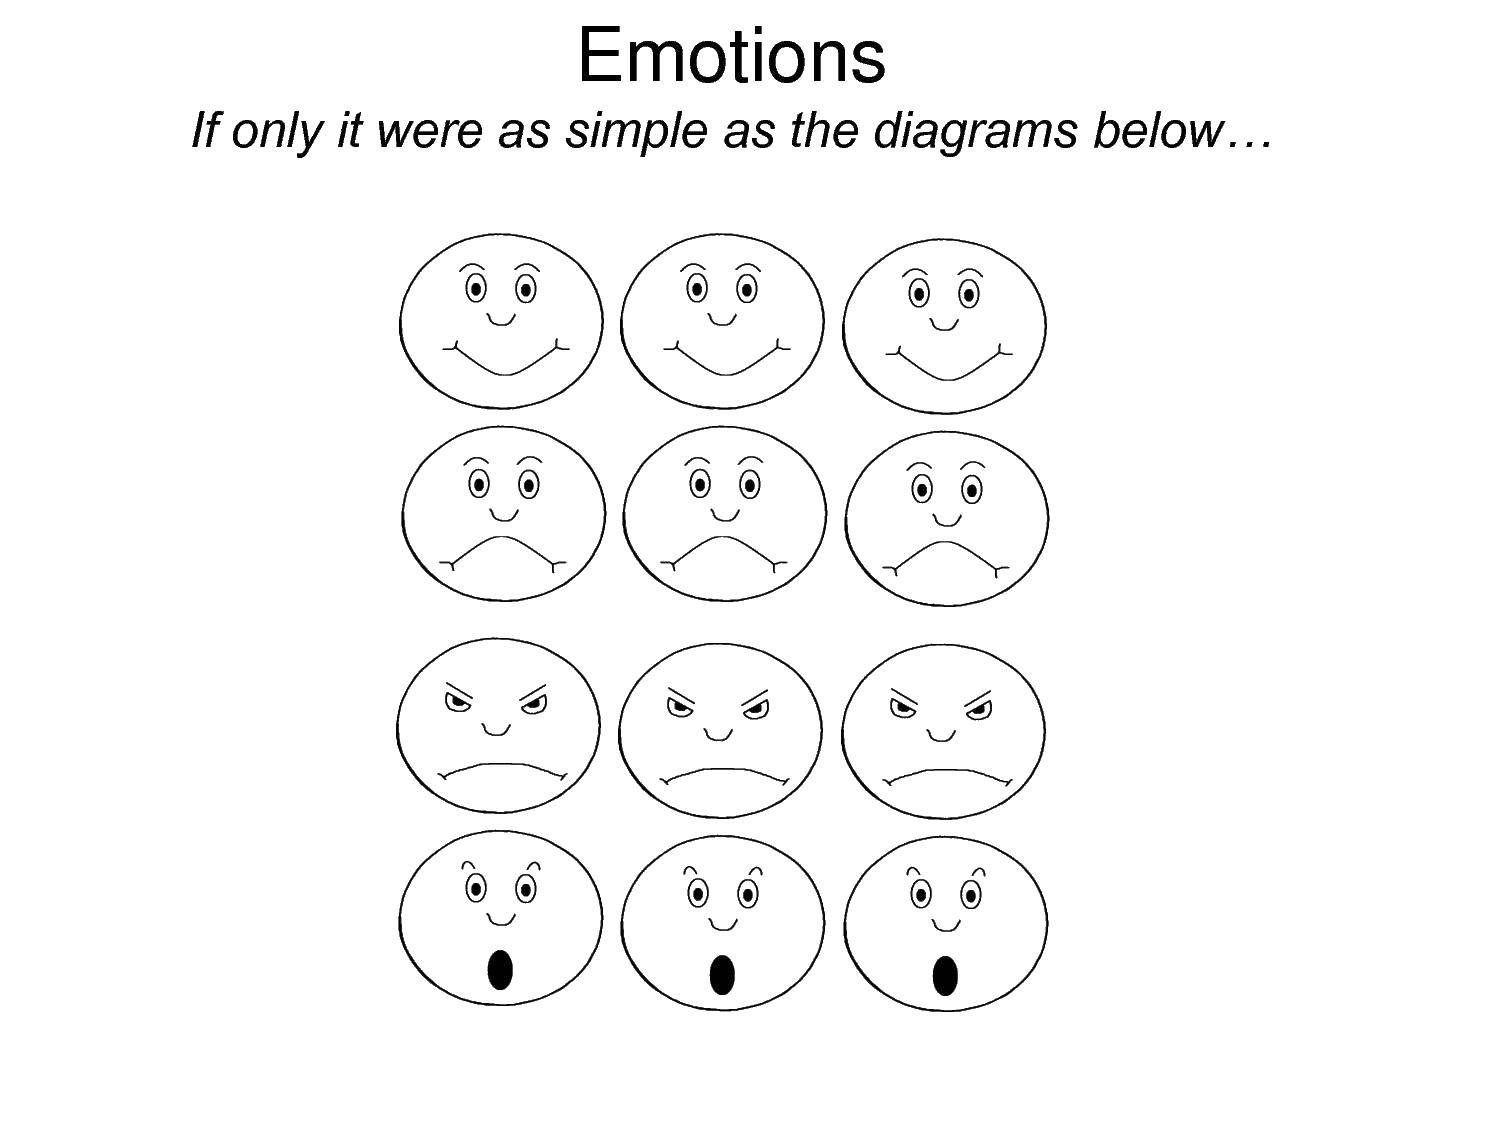 Coloring Emotions emoticons. Category The emotions. Tags:  emotions, emoticons, smilies.